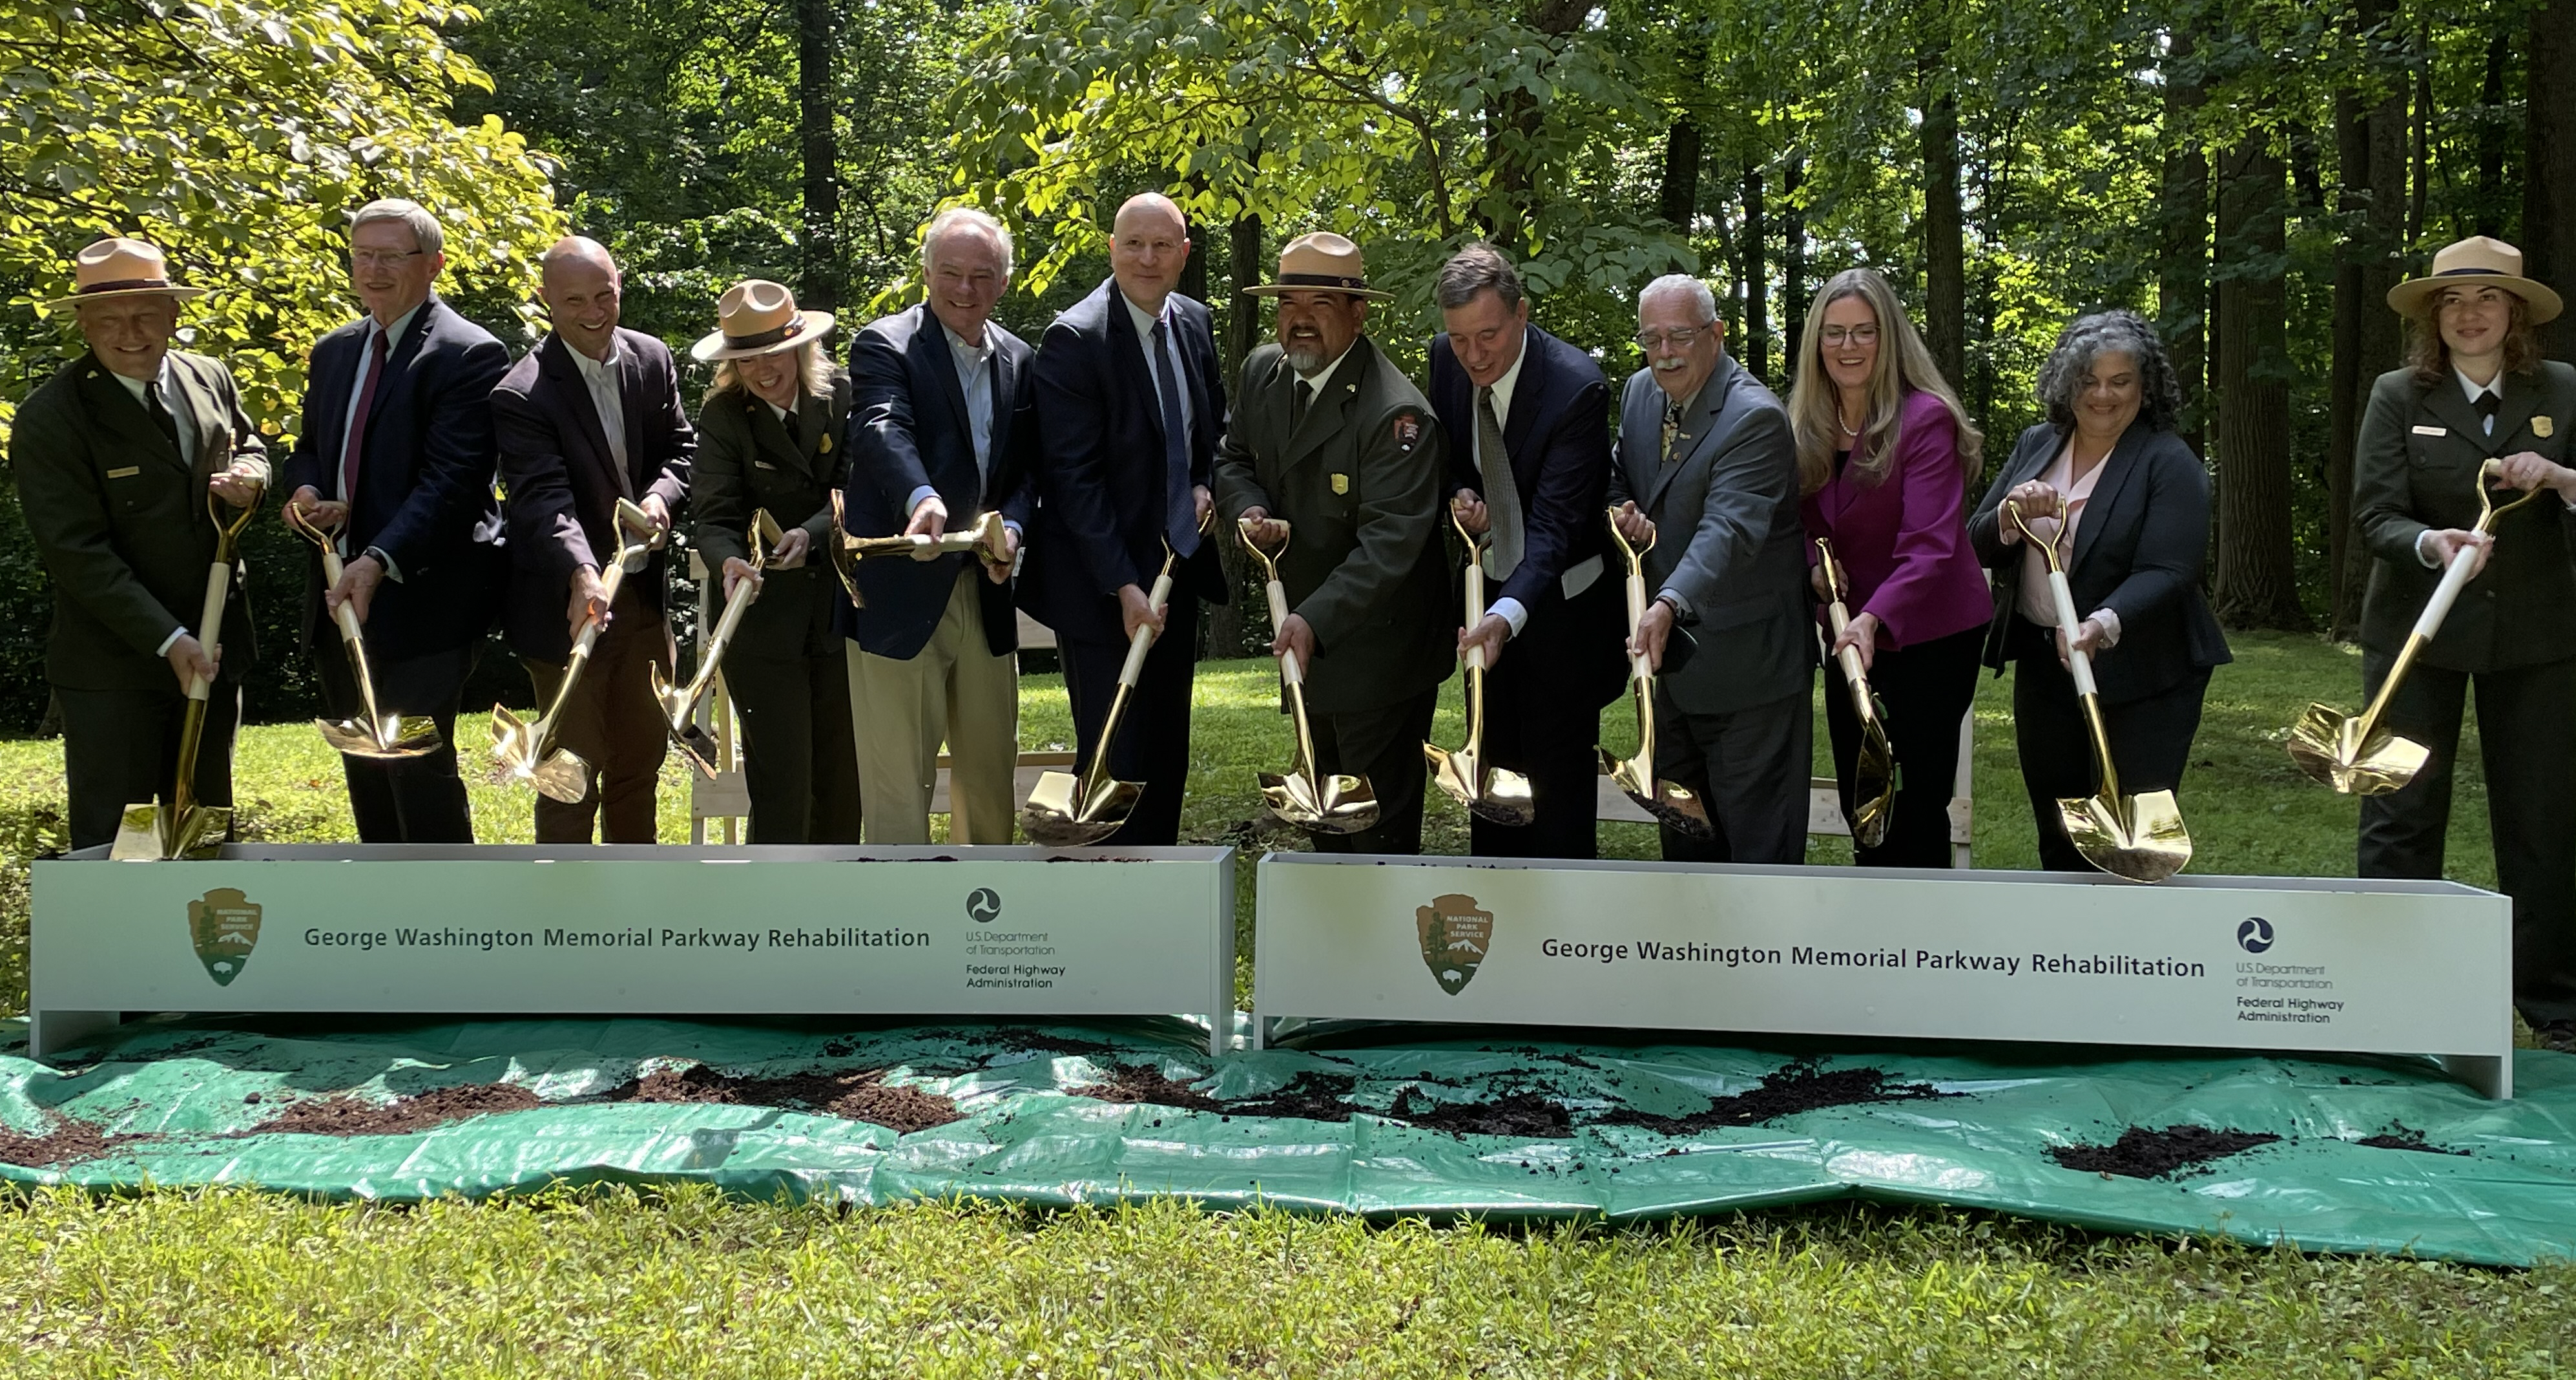 Department of the Interior Announces Start of Historic Rehabilitation of George Washington Memorial Parkway